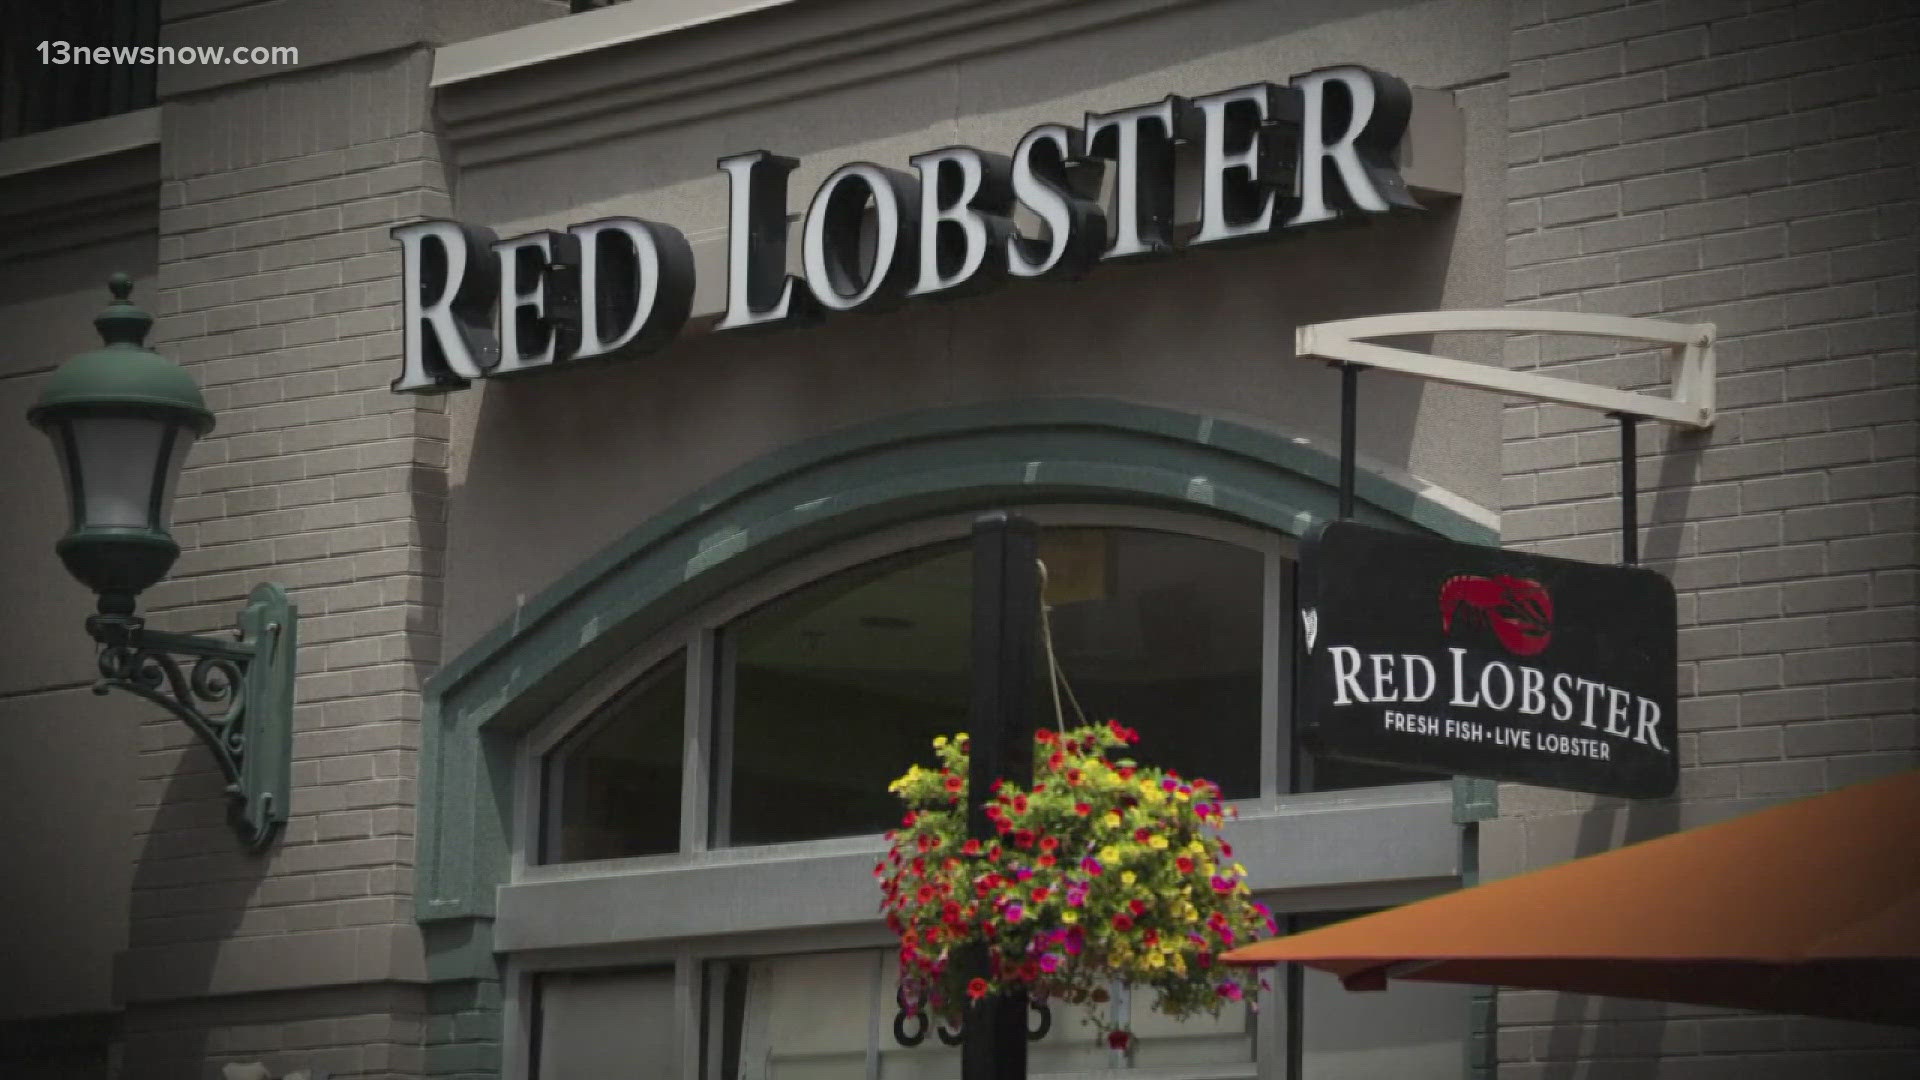 Red Lobster reportedly filing for bankruptcy protection after abruptly closing dozens of locations across the country.